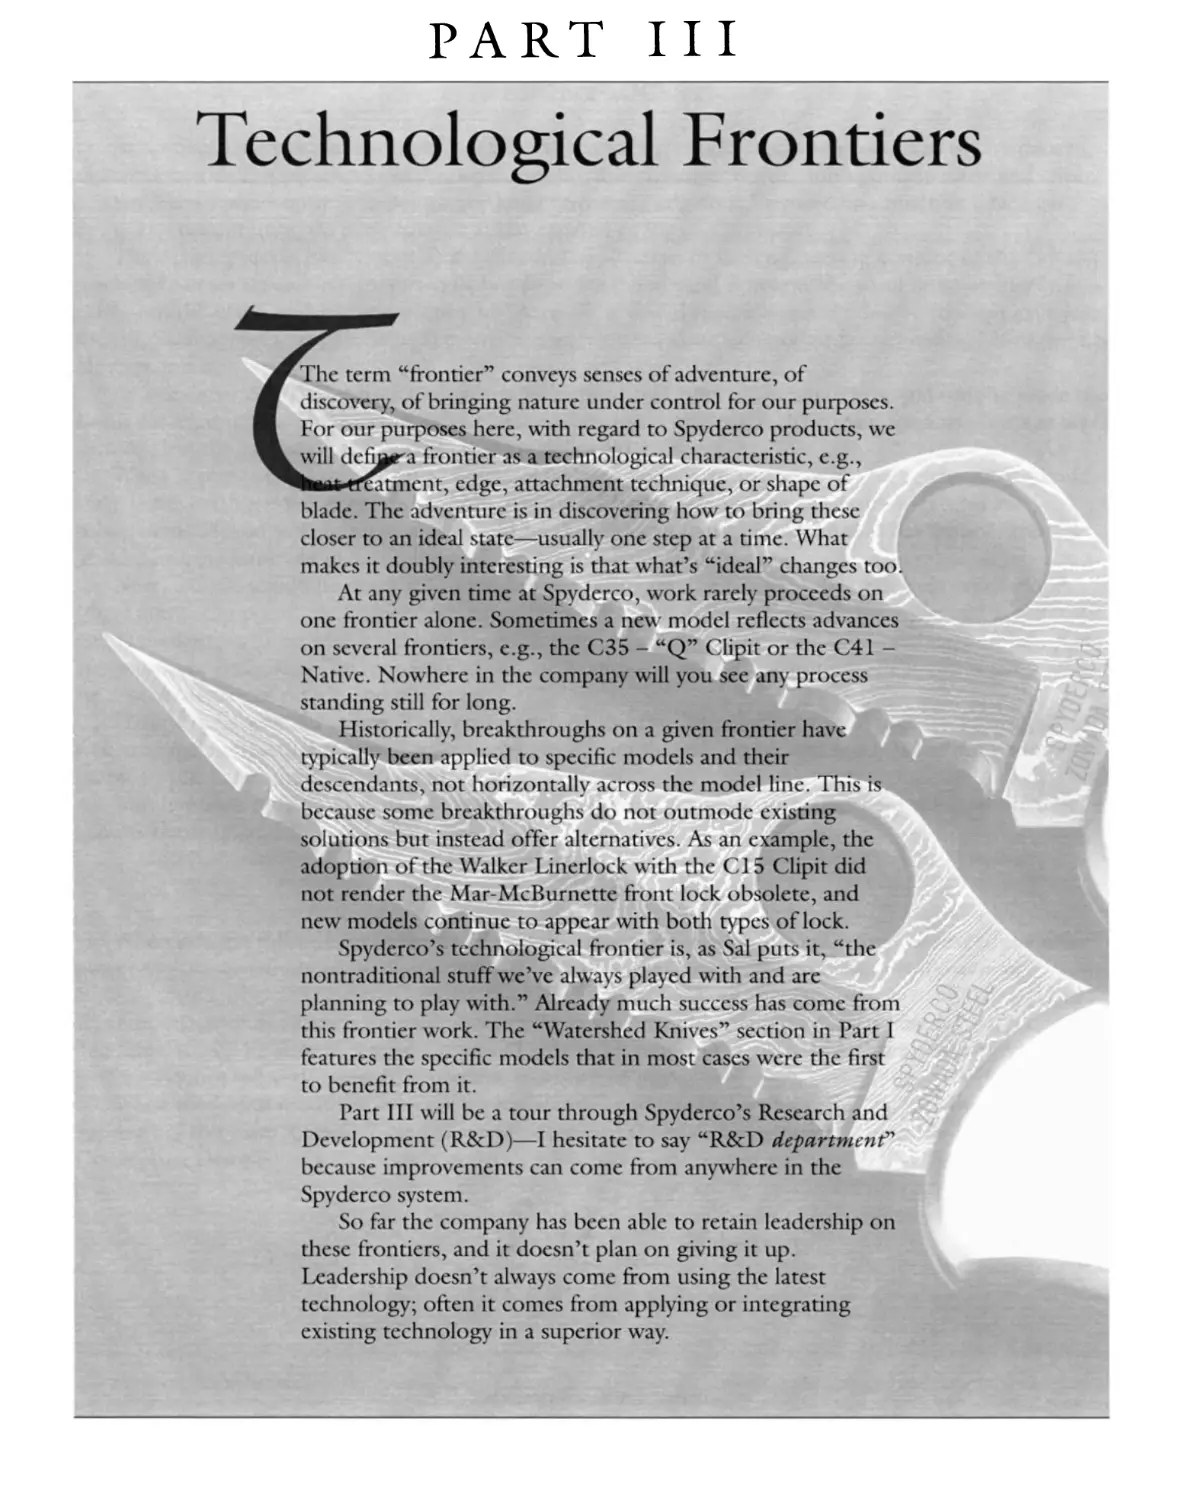 PART III: TECHNOLOGICAL FRONTIERS